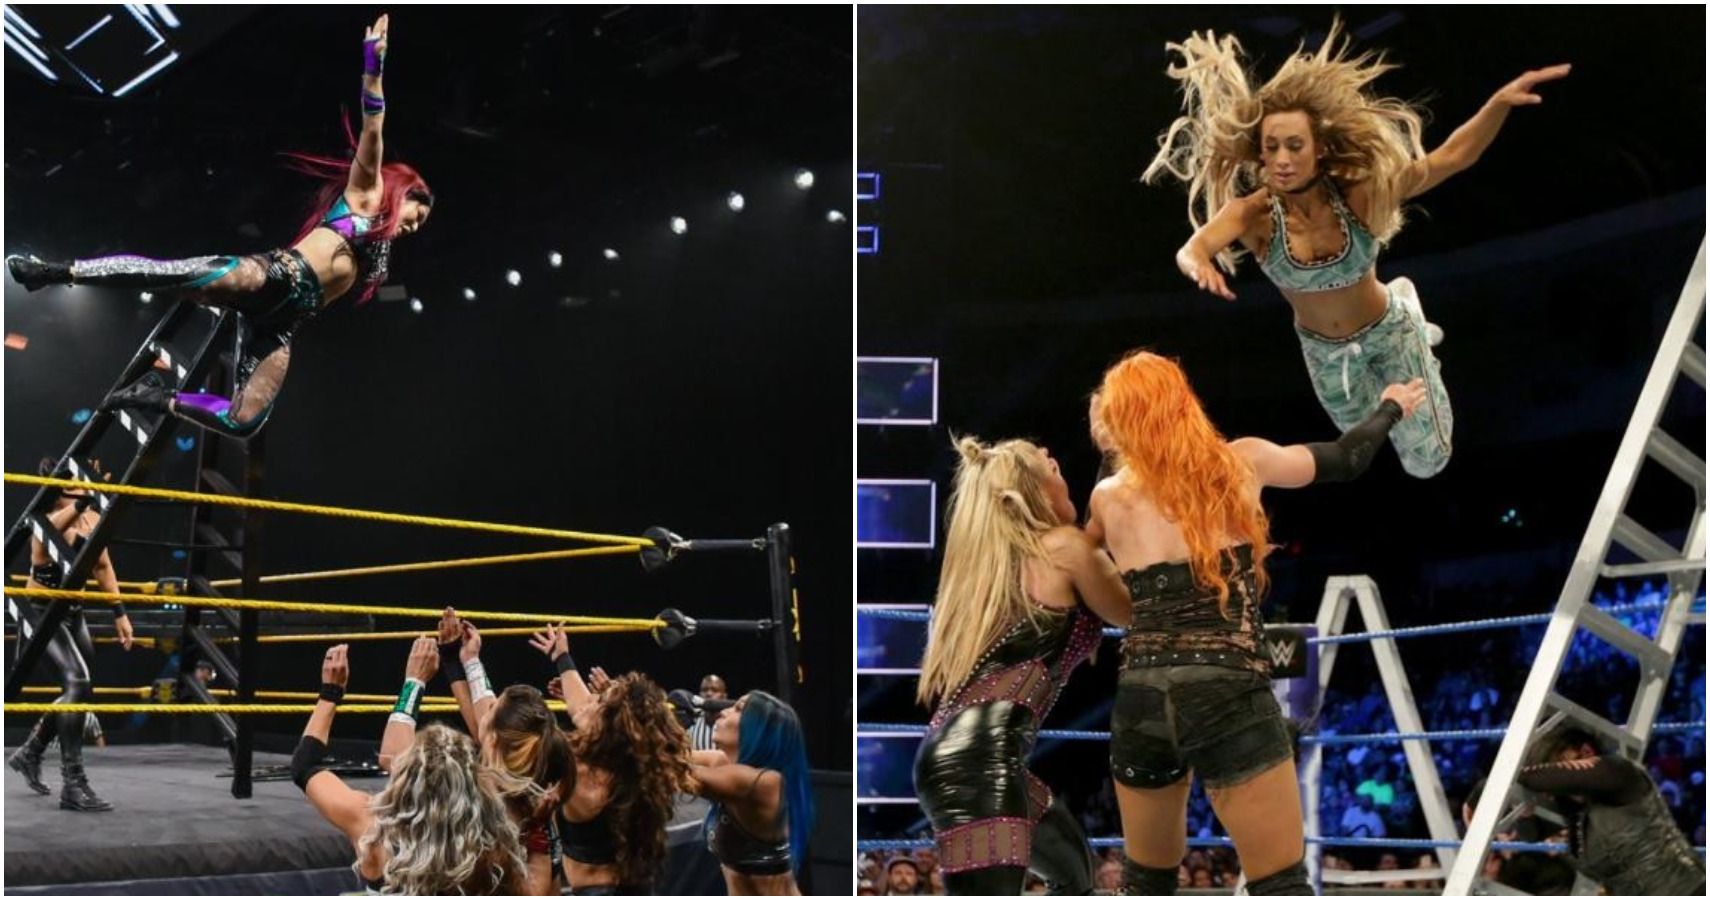 Every Women's Ladder/TLC Match In WWE History, Ranked From Worst To Best